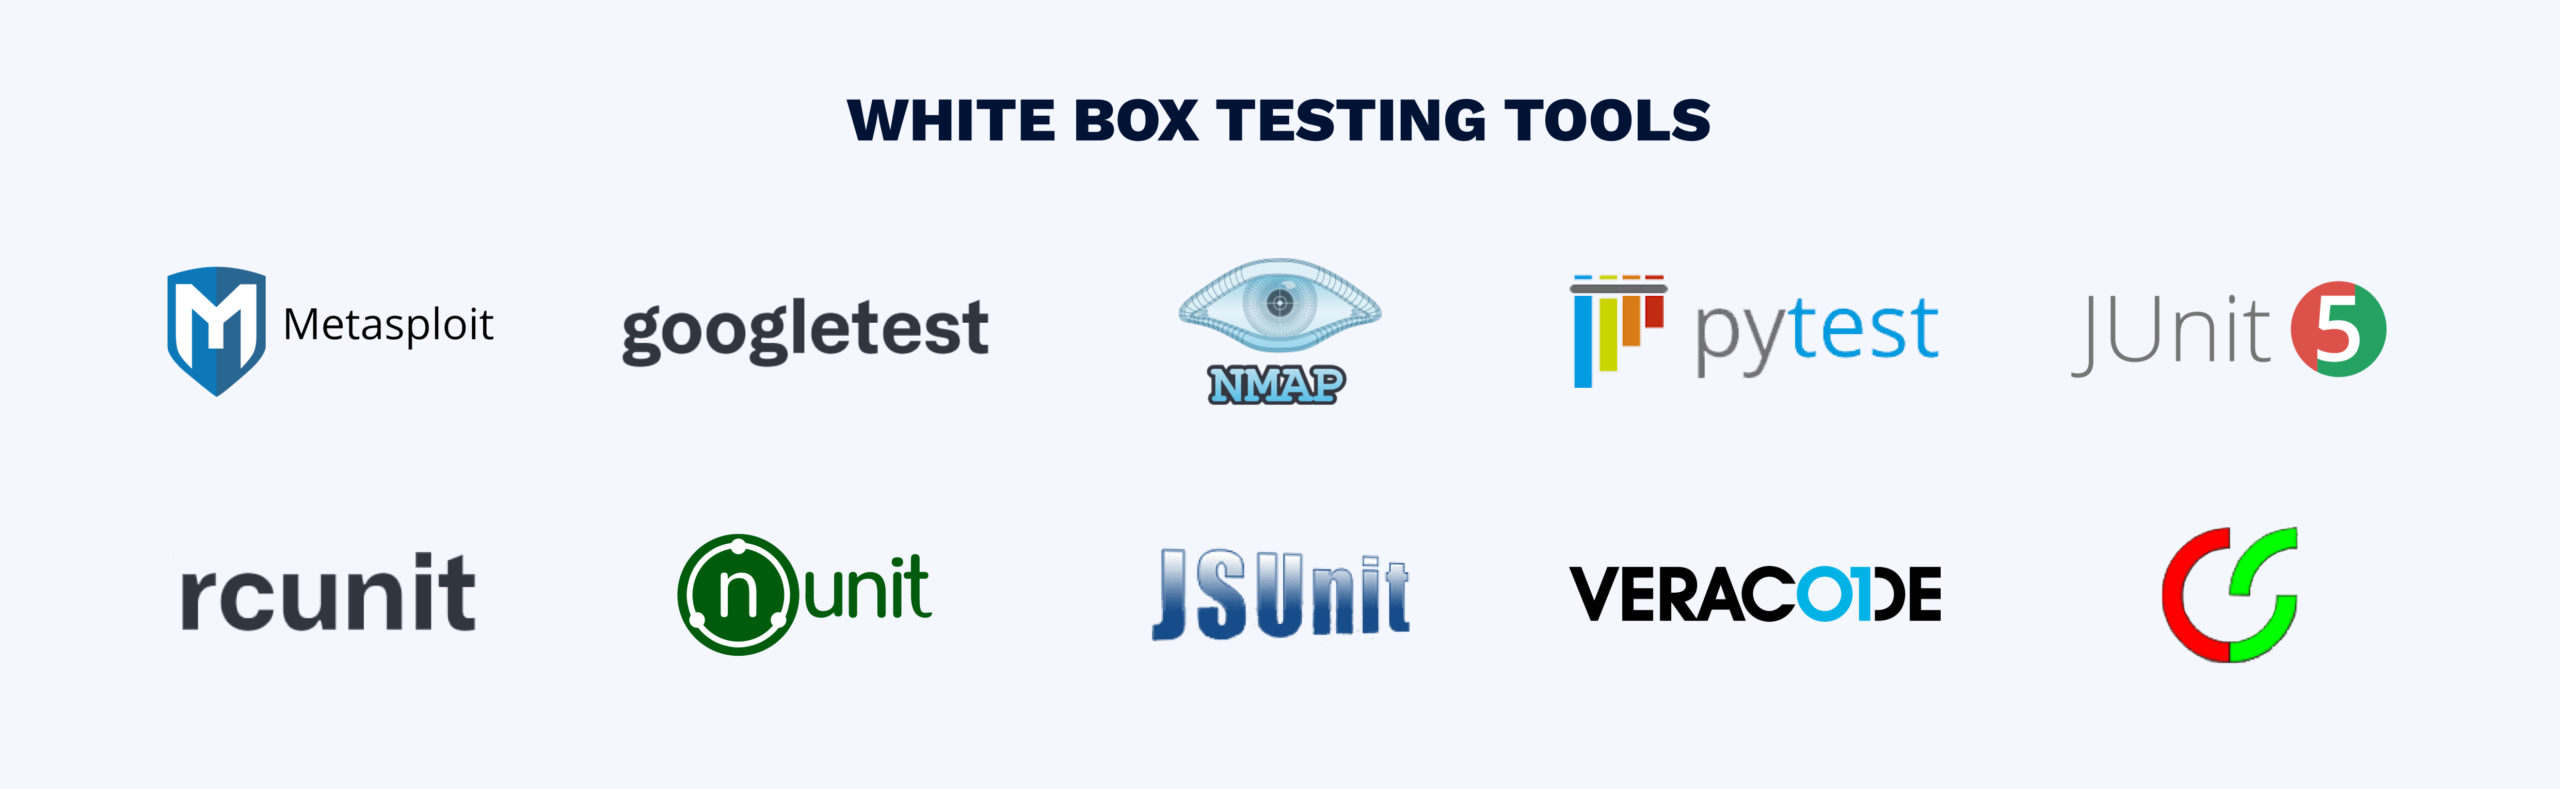 Top tools for white box testing